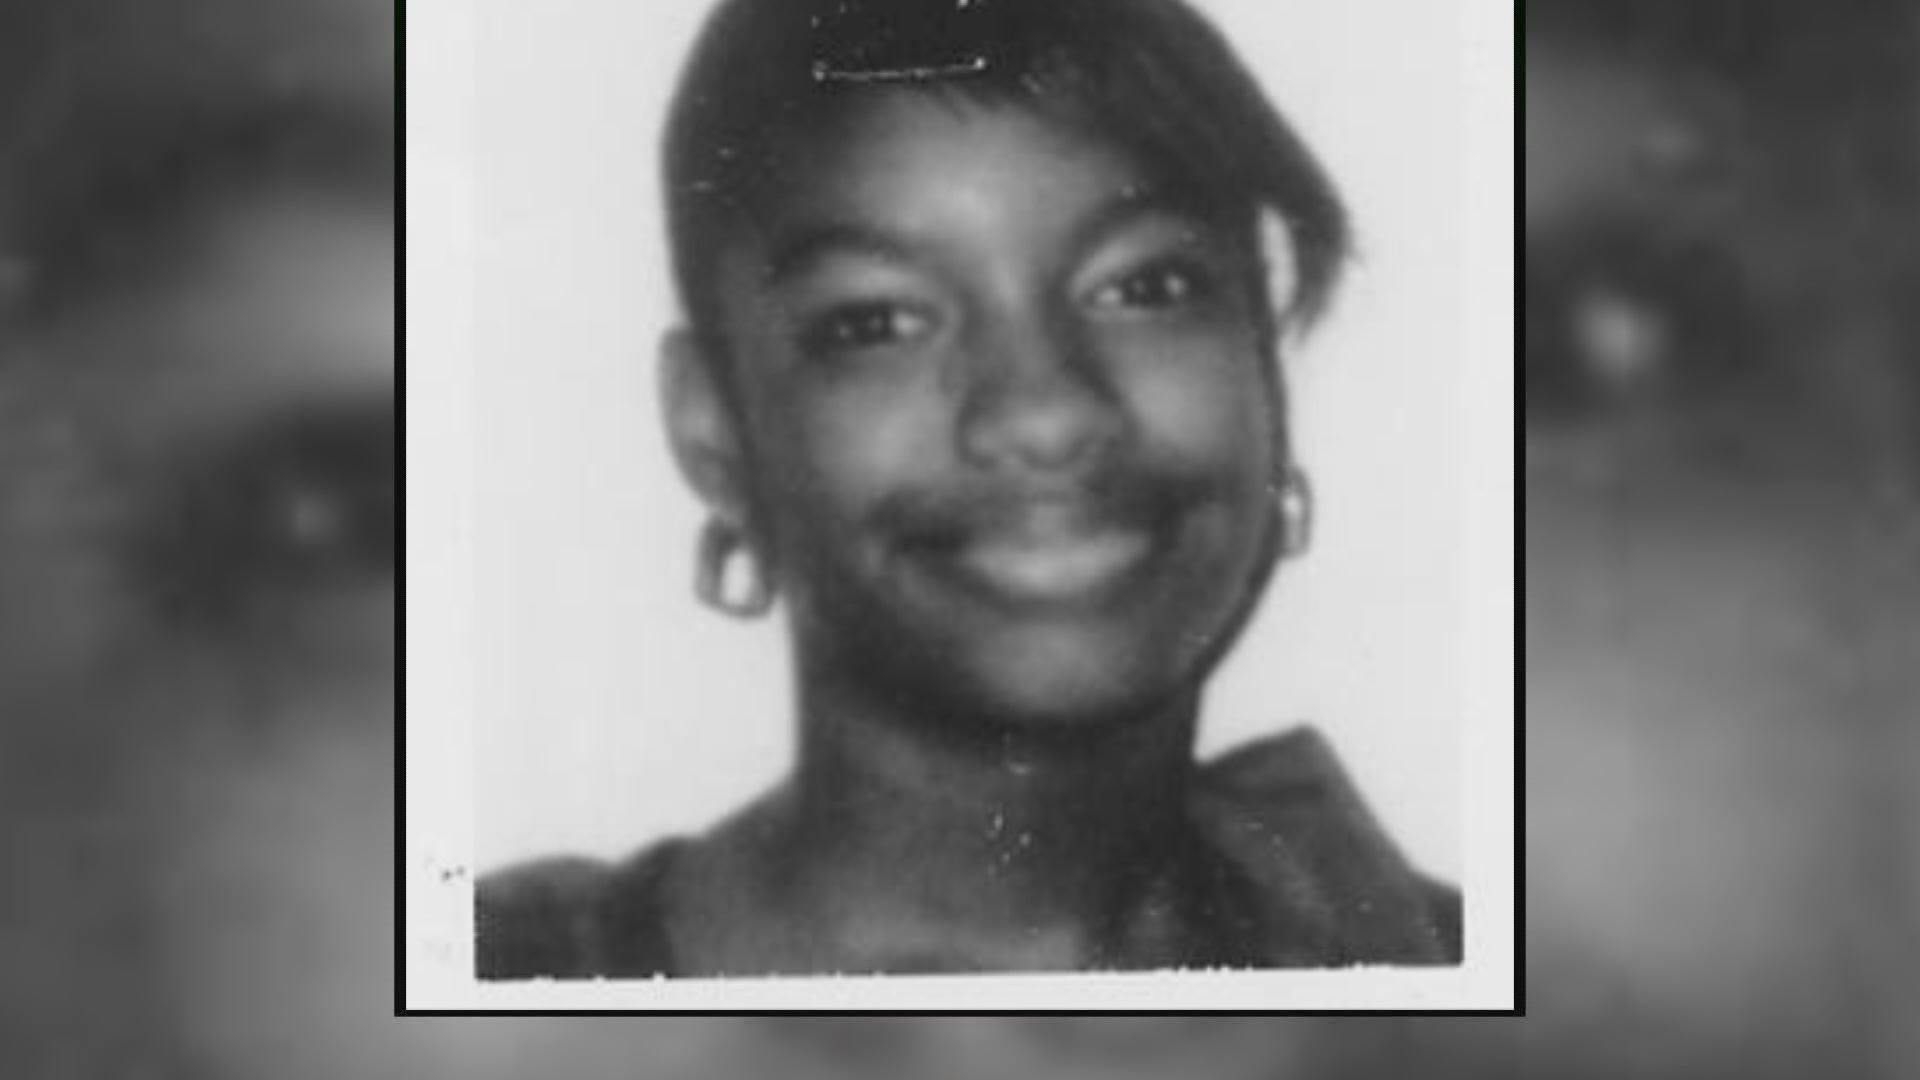 Nacole Smith was raped and murdered in June over two decades ago in Atlanta. Police previously said it happened in the woods by some apartments on Campbellton Road.